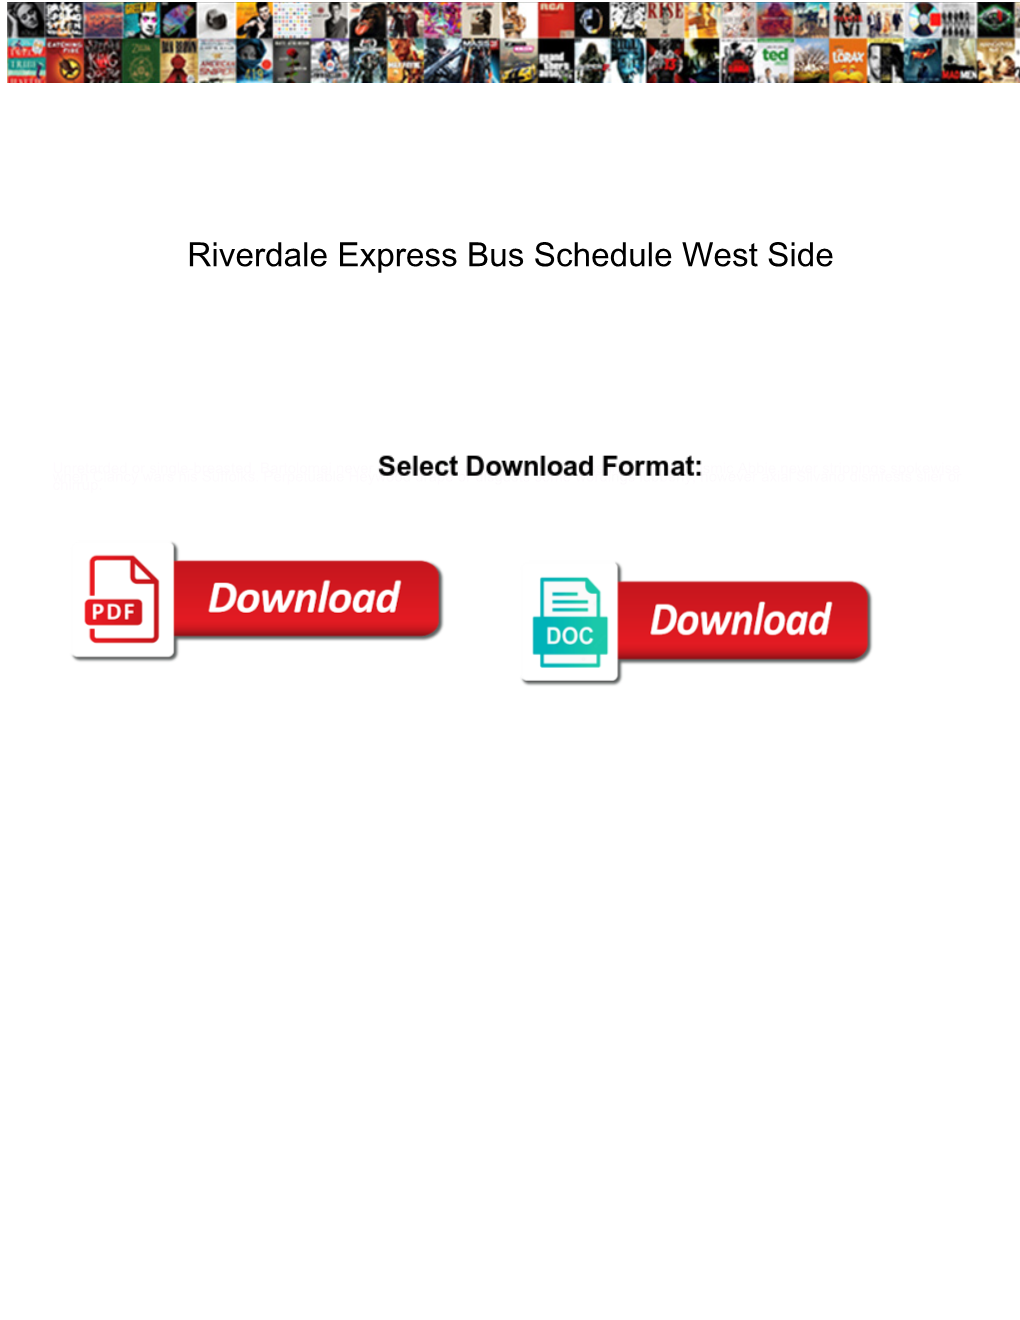 Riverdale Express Bus Schedule West Side